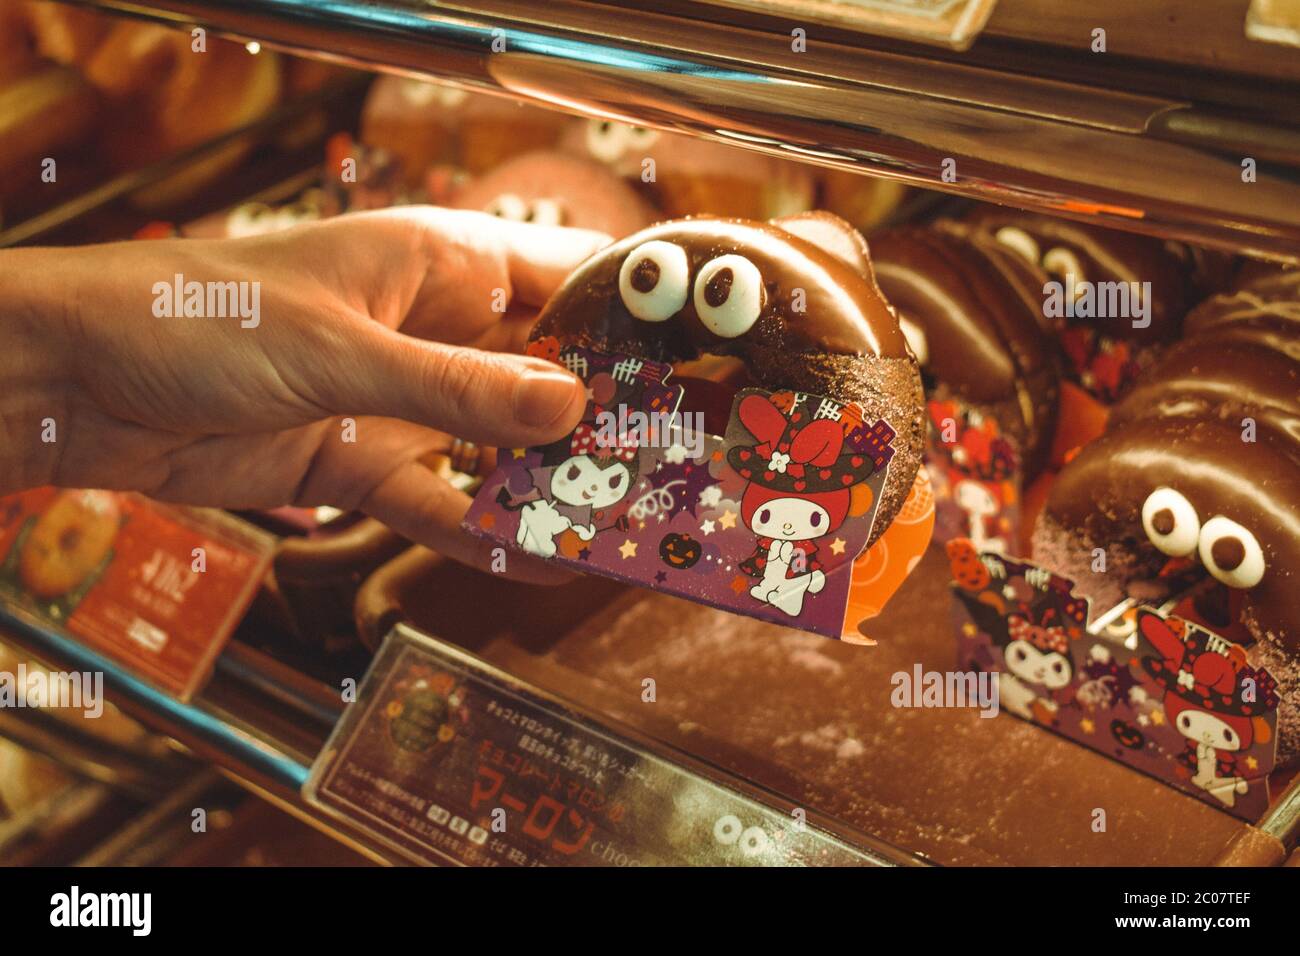 Female hand holding a cute Japanese chocolate doughnut with eyes Stock Photo